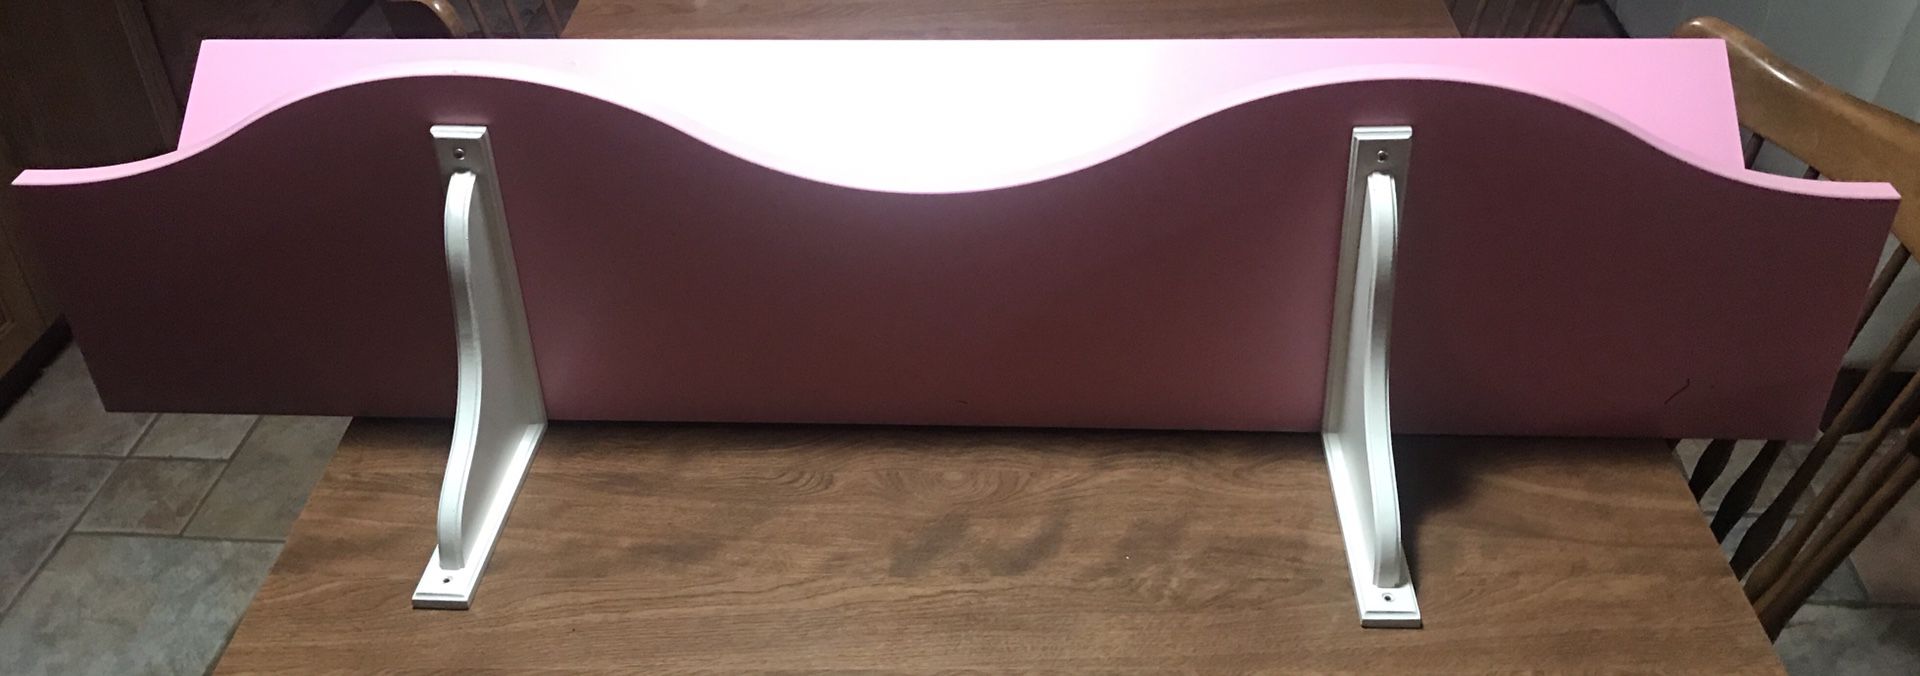 48” wide pink used wall shelves